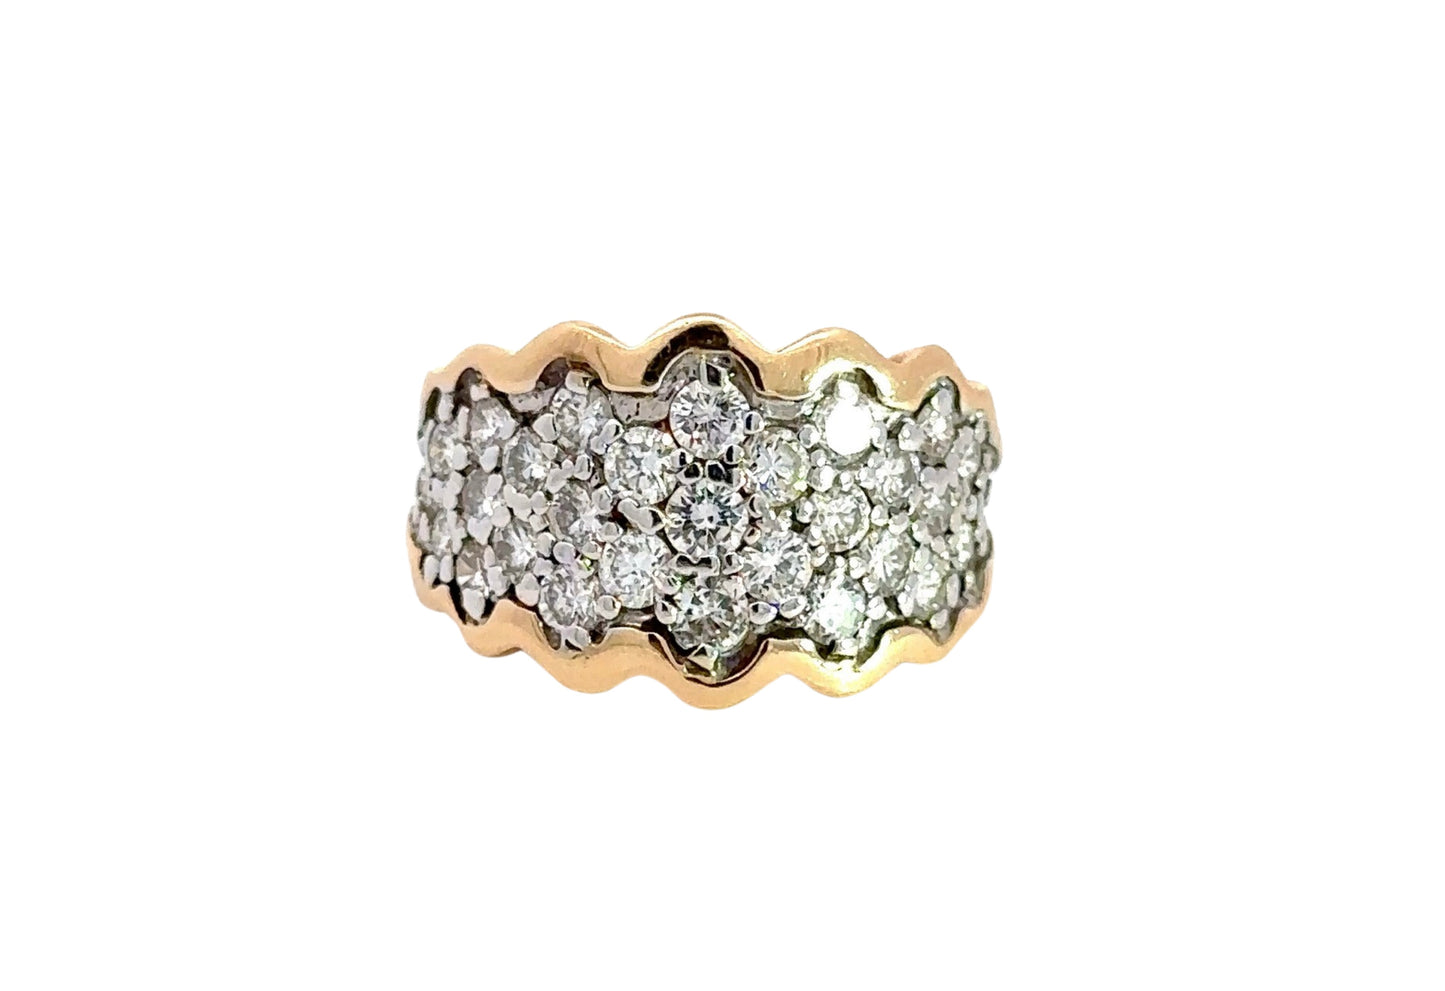 Front of diamond bang ring with a wavy gold design on the outline in yellow and white gold. Round diamonds ranging from .03-.05 carats on band